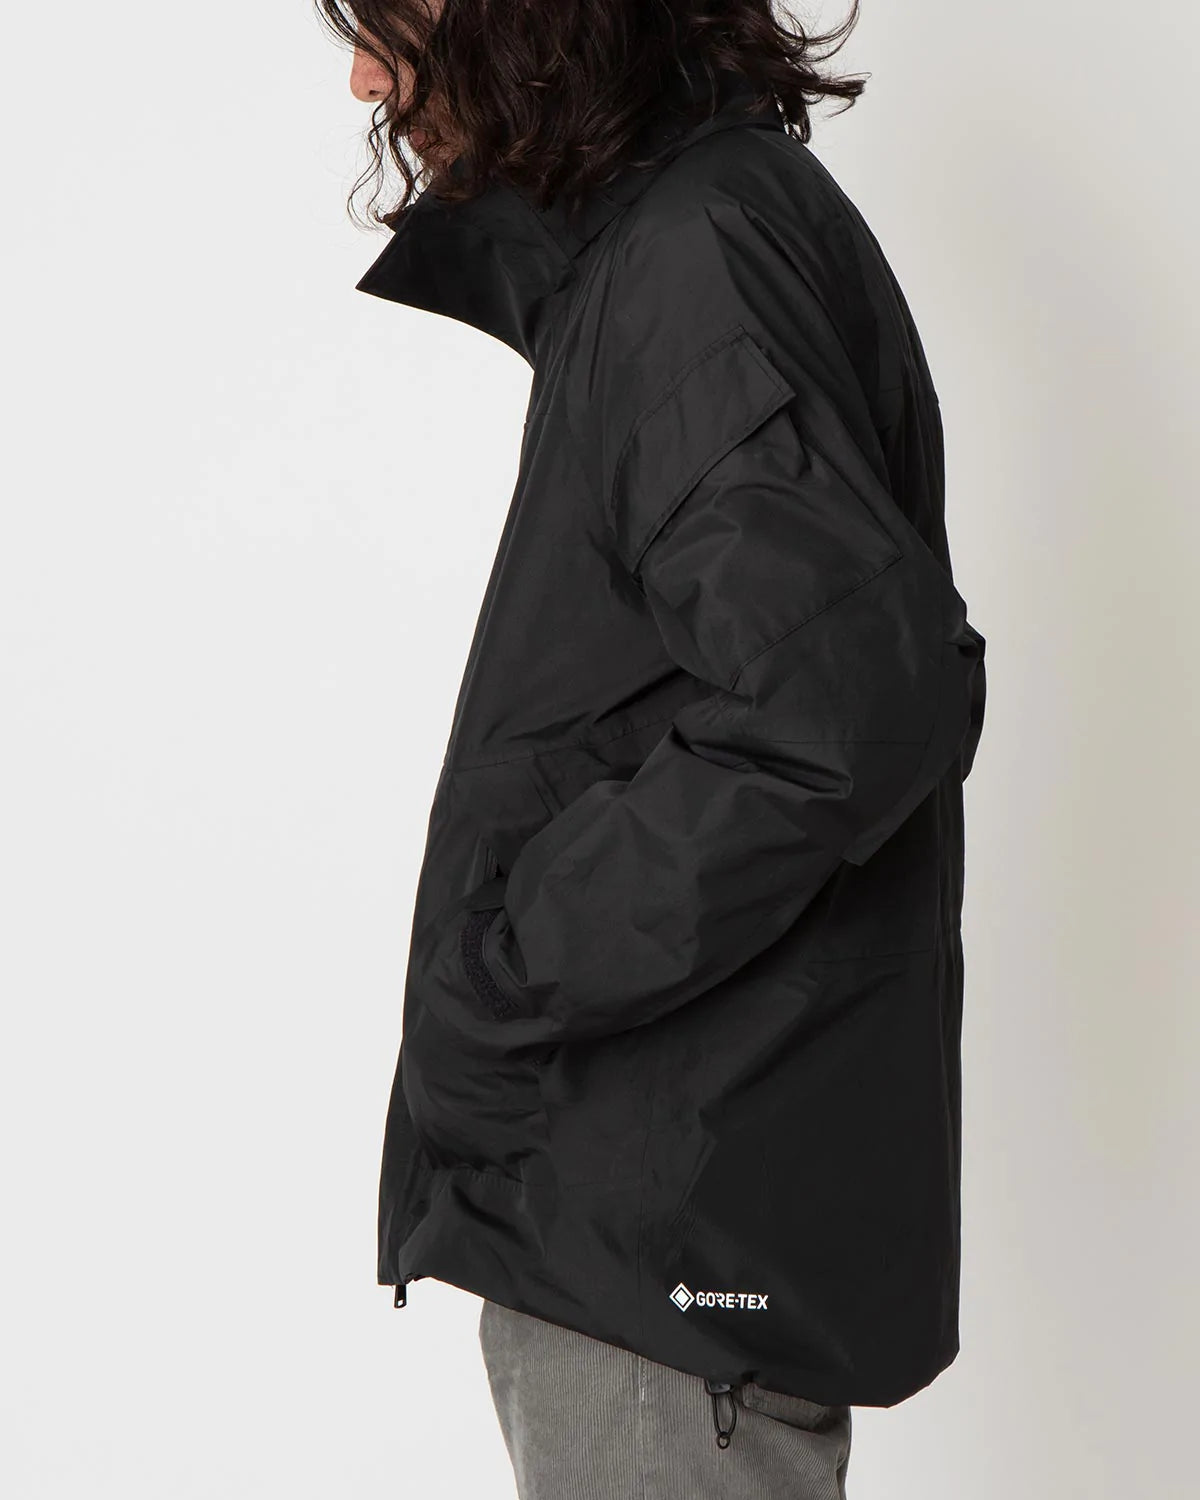 HIKER JACKET POLY TAFFETA WITH GORE-TEX 2L THE GROUND depot. ONLINESTORE